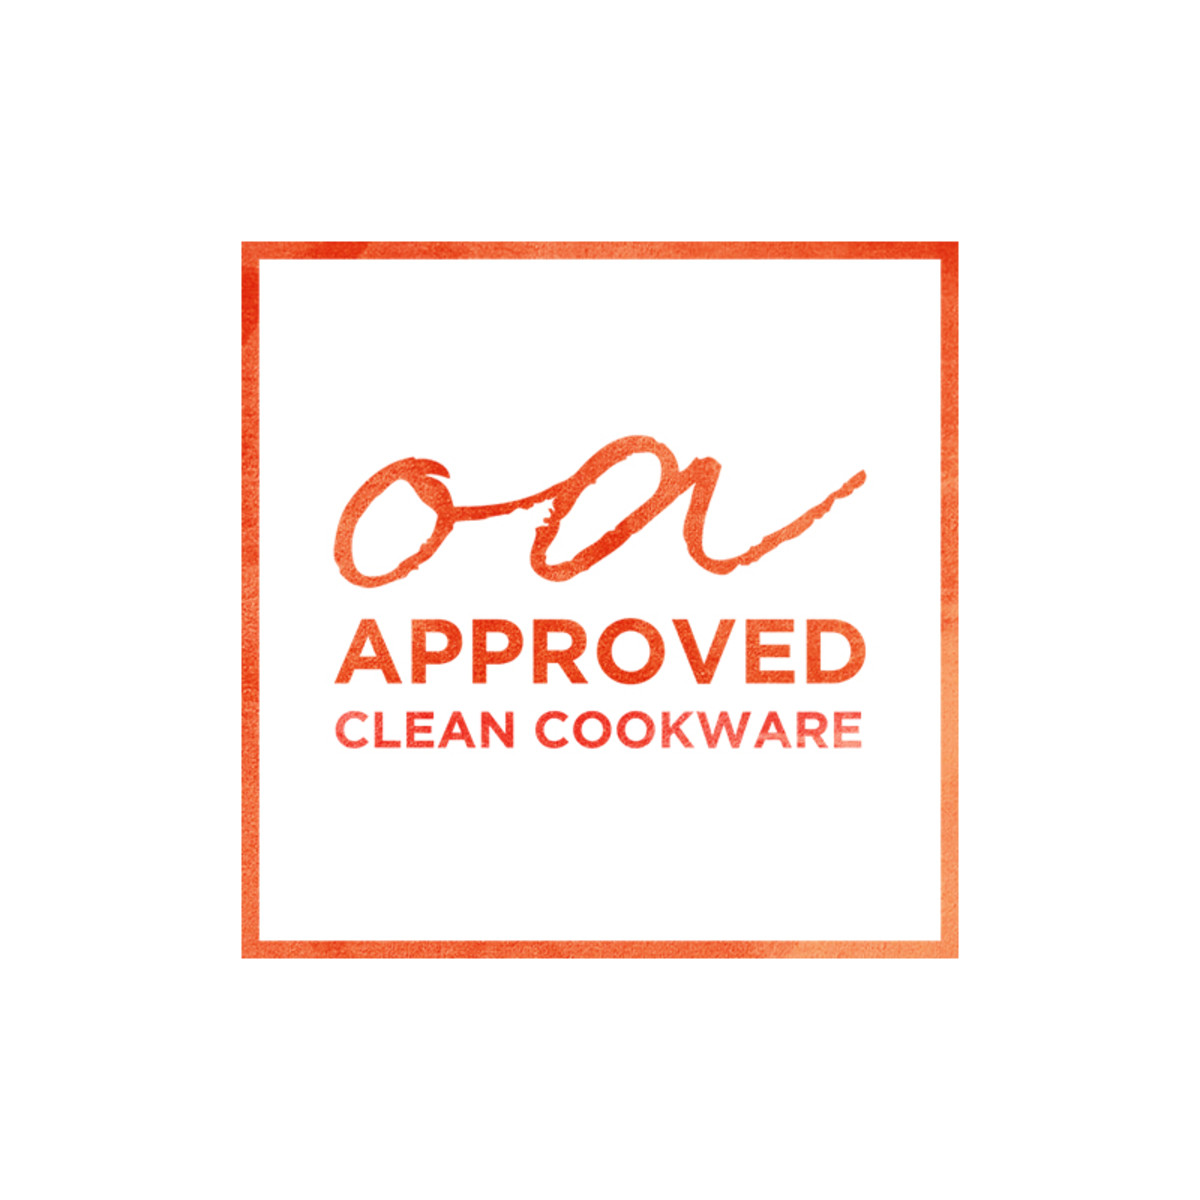 The Organic Authority Approved non-toxic, clean cookware badge